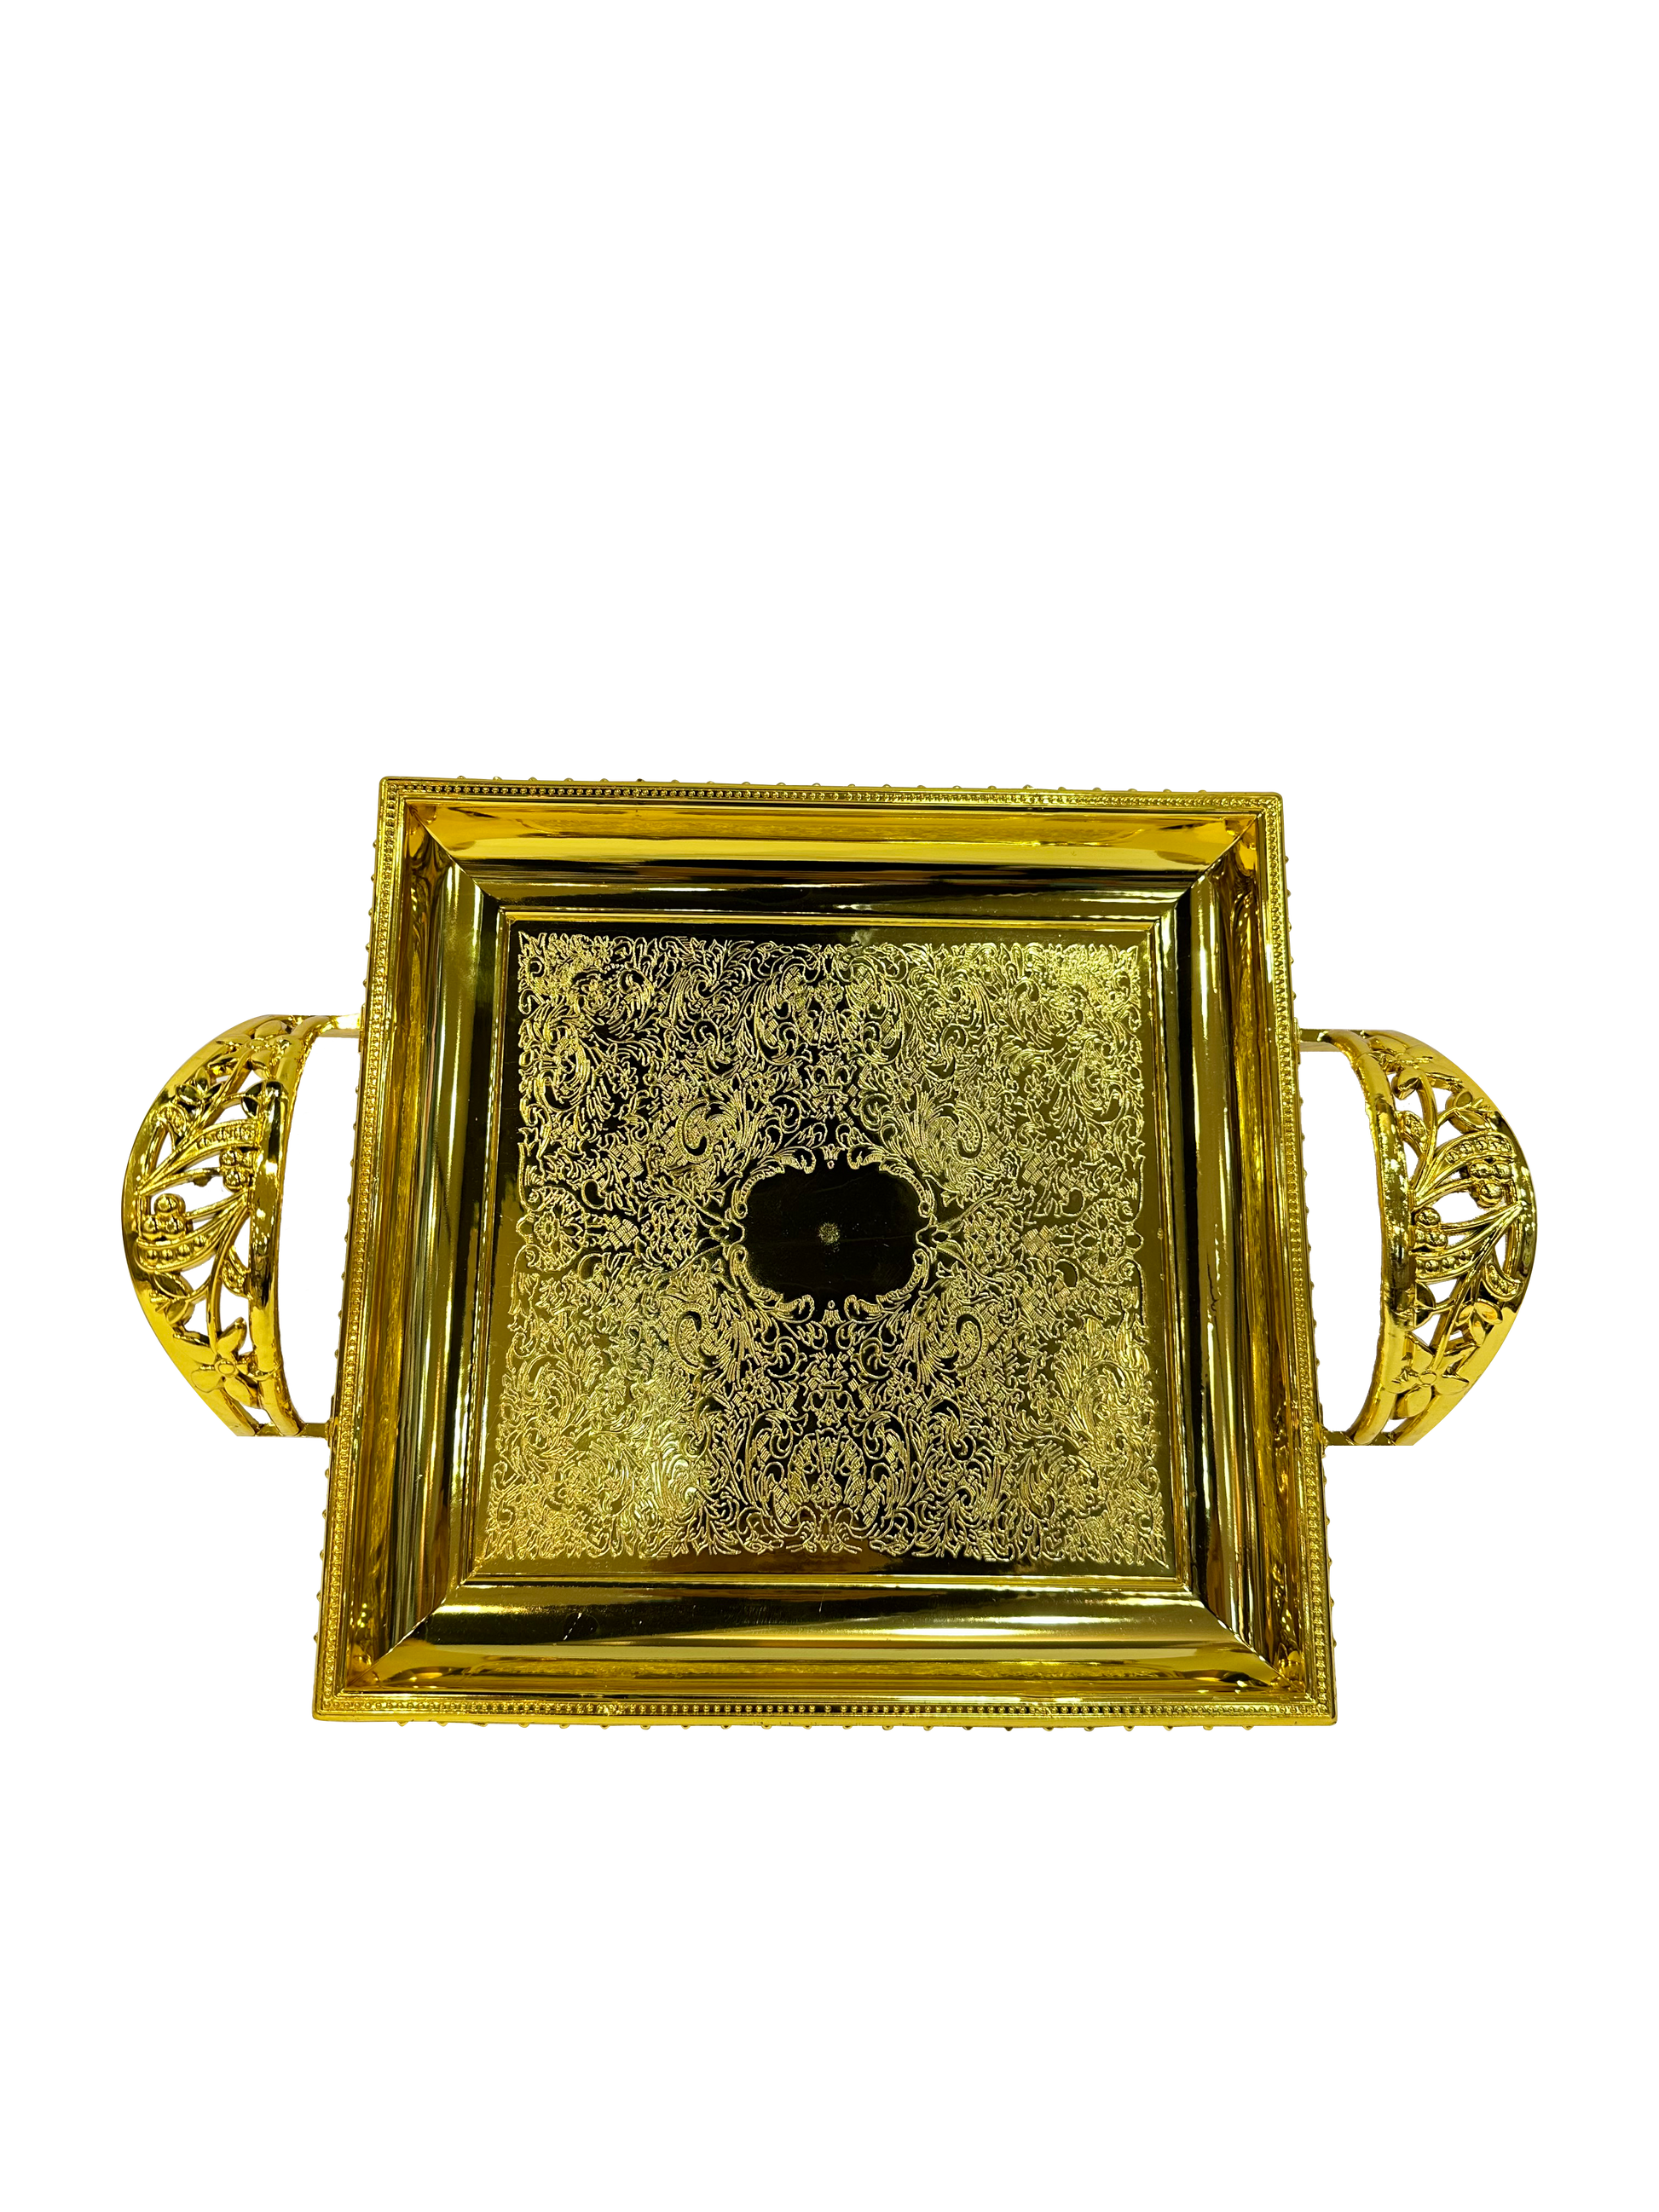 Classy Gold Serving Tray - Sunset Gifts Store